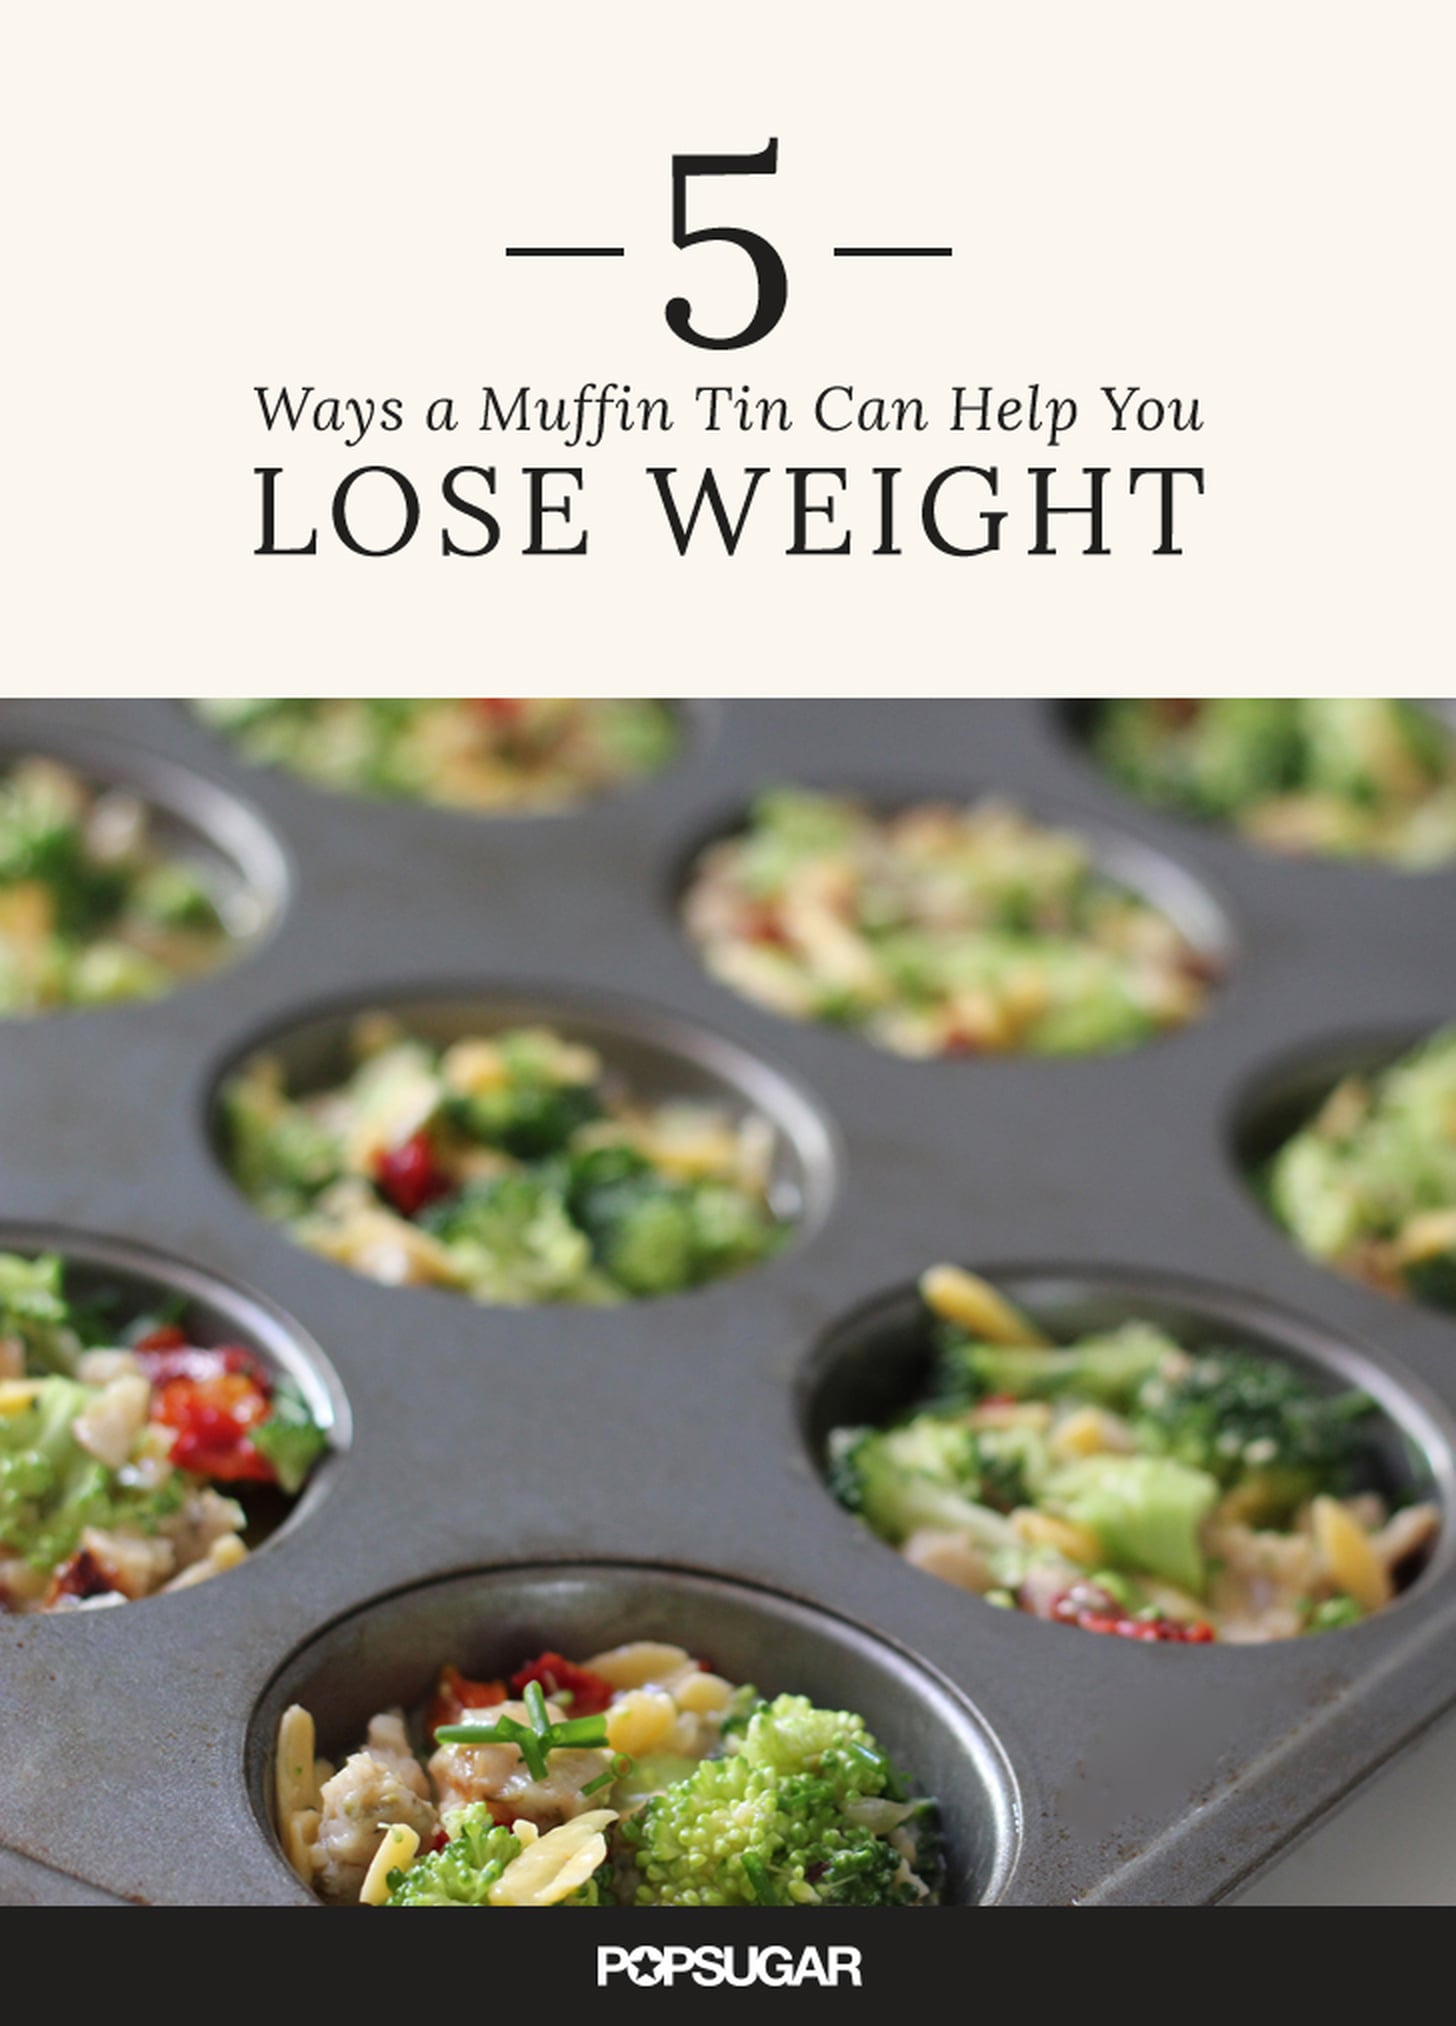 Muffin Tin For Weight Loss | POPSUGAR Fitness